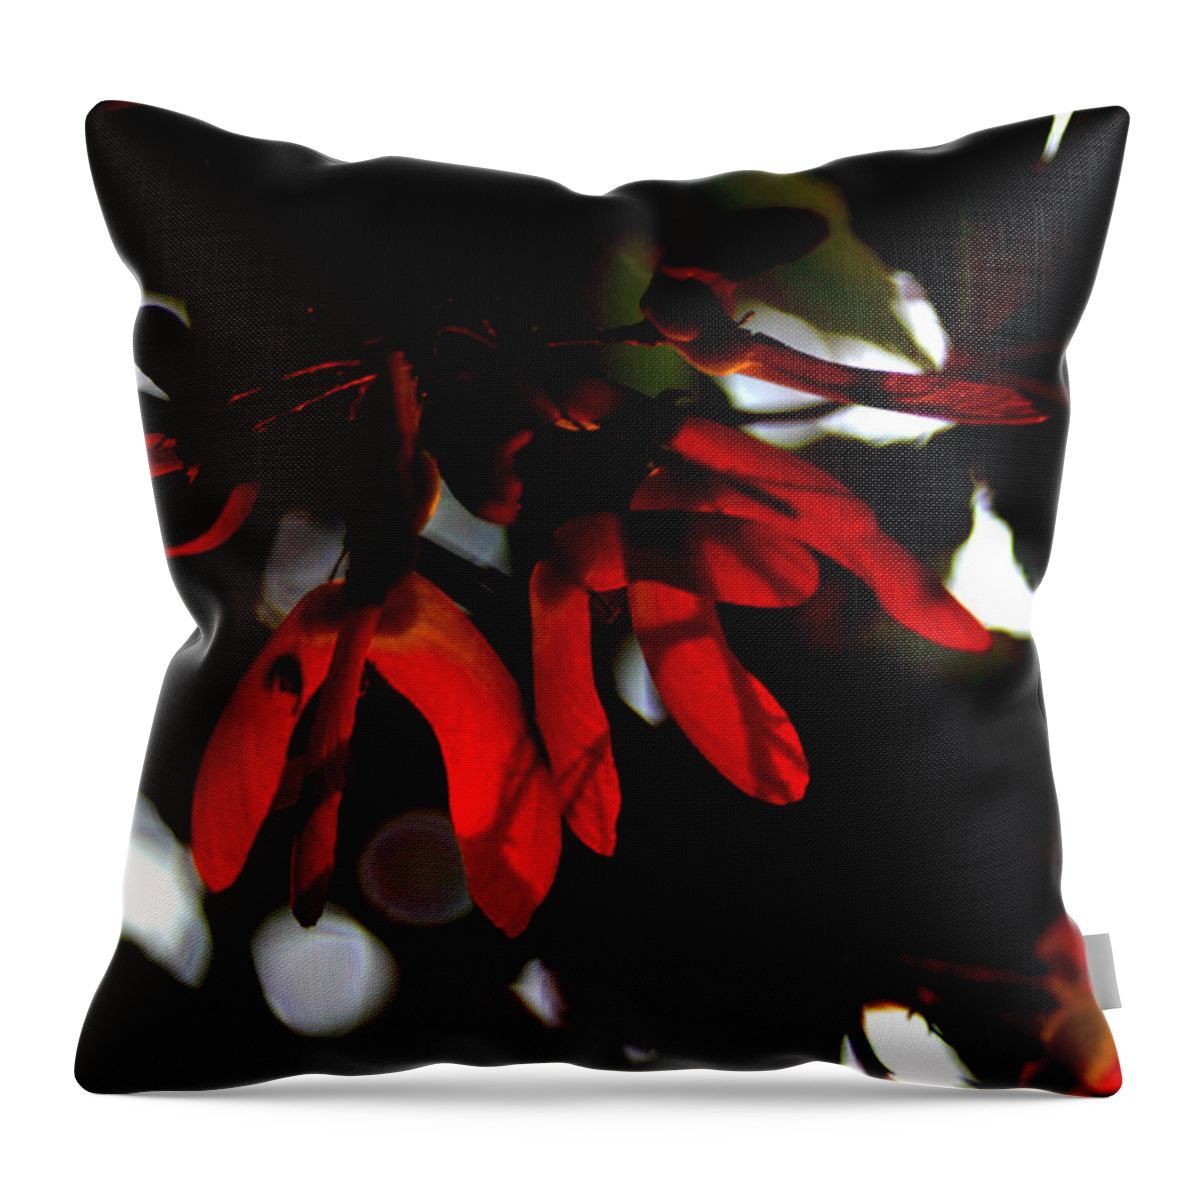 Maple Throw Pillow featuring the photograph Japanese Maple Seed Pods by Robert Morin